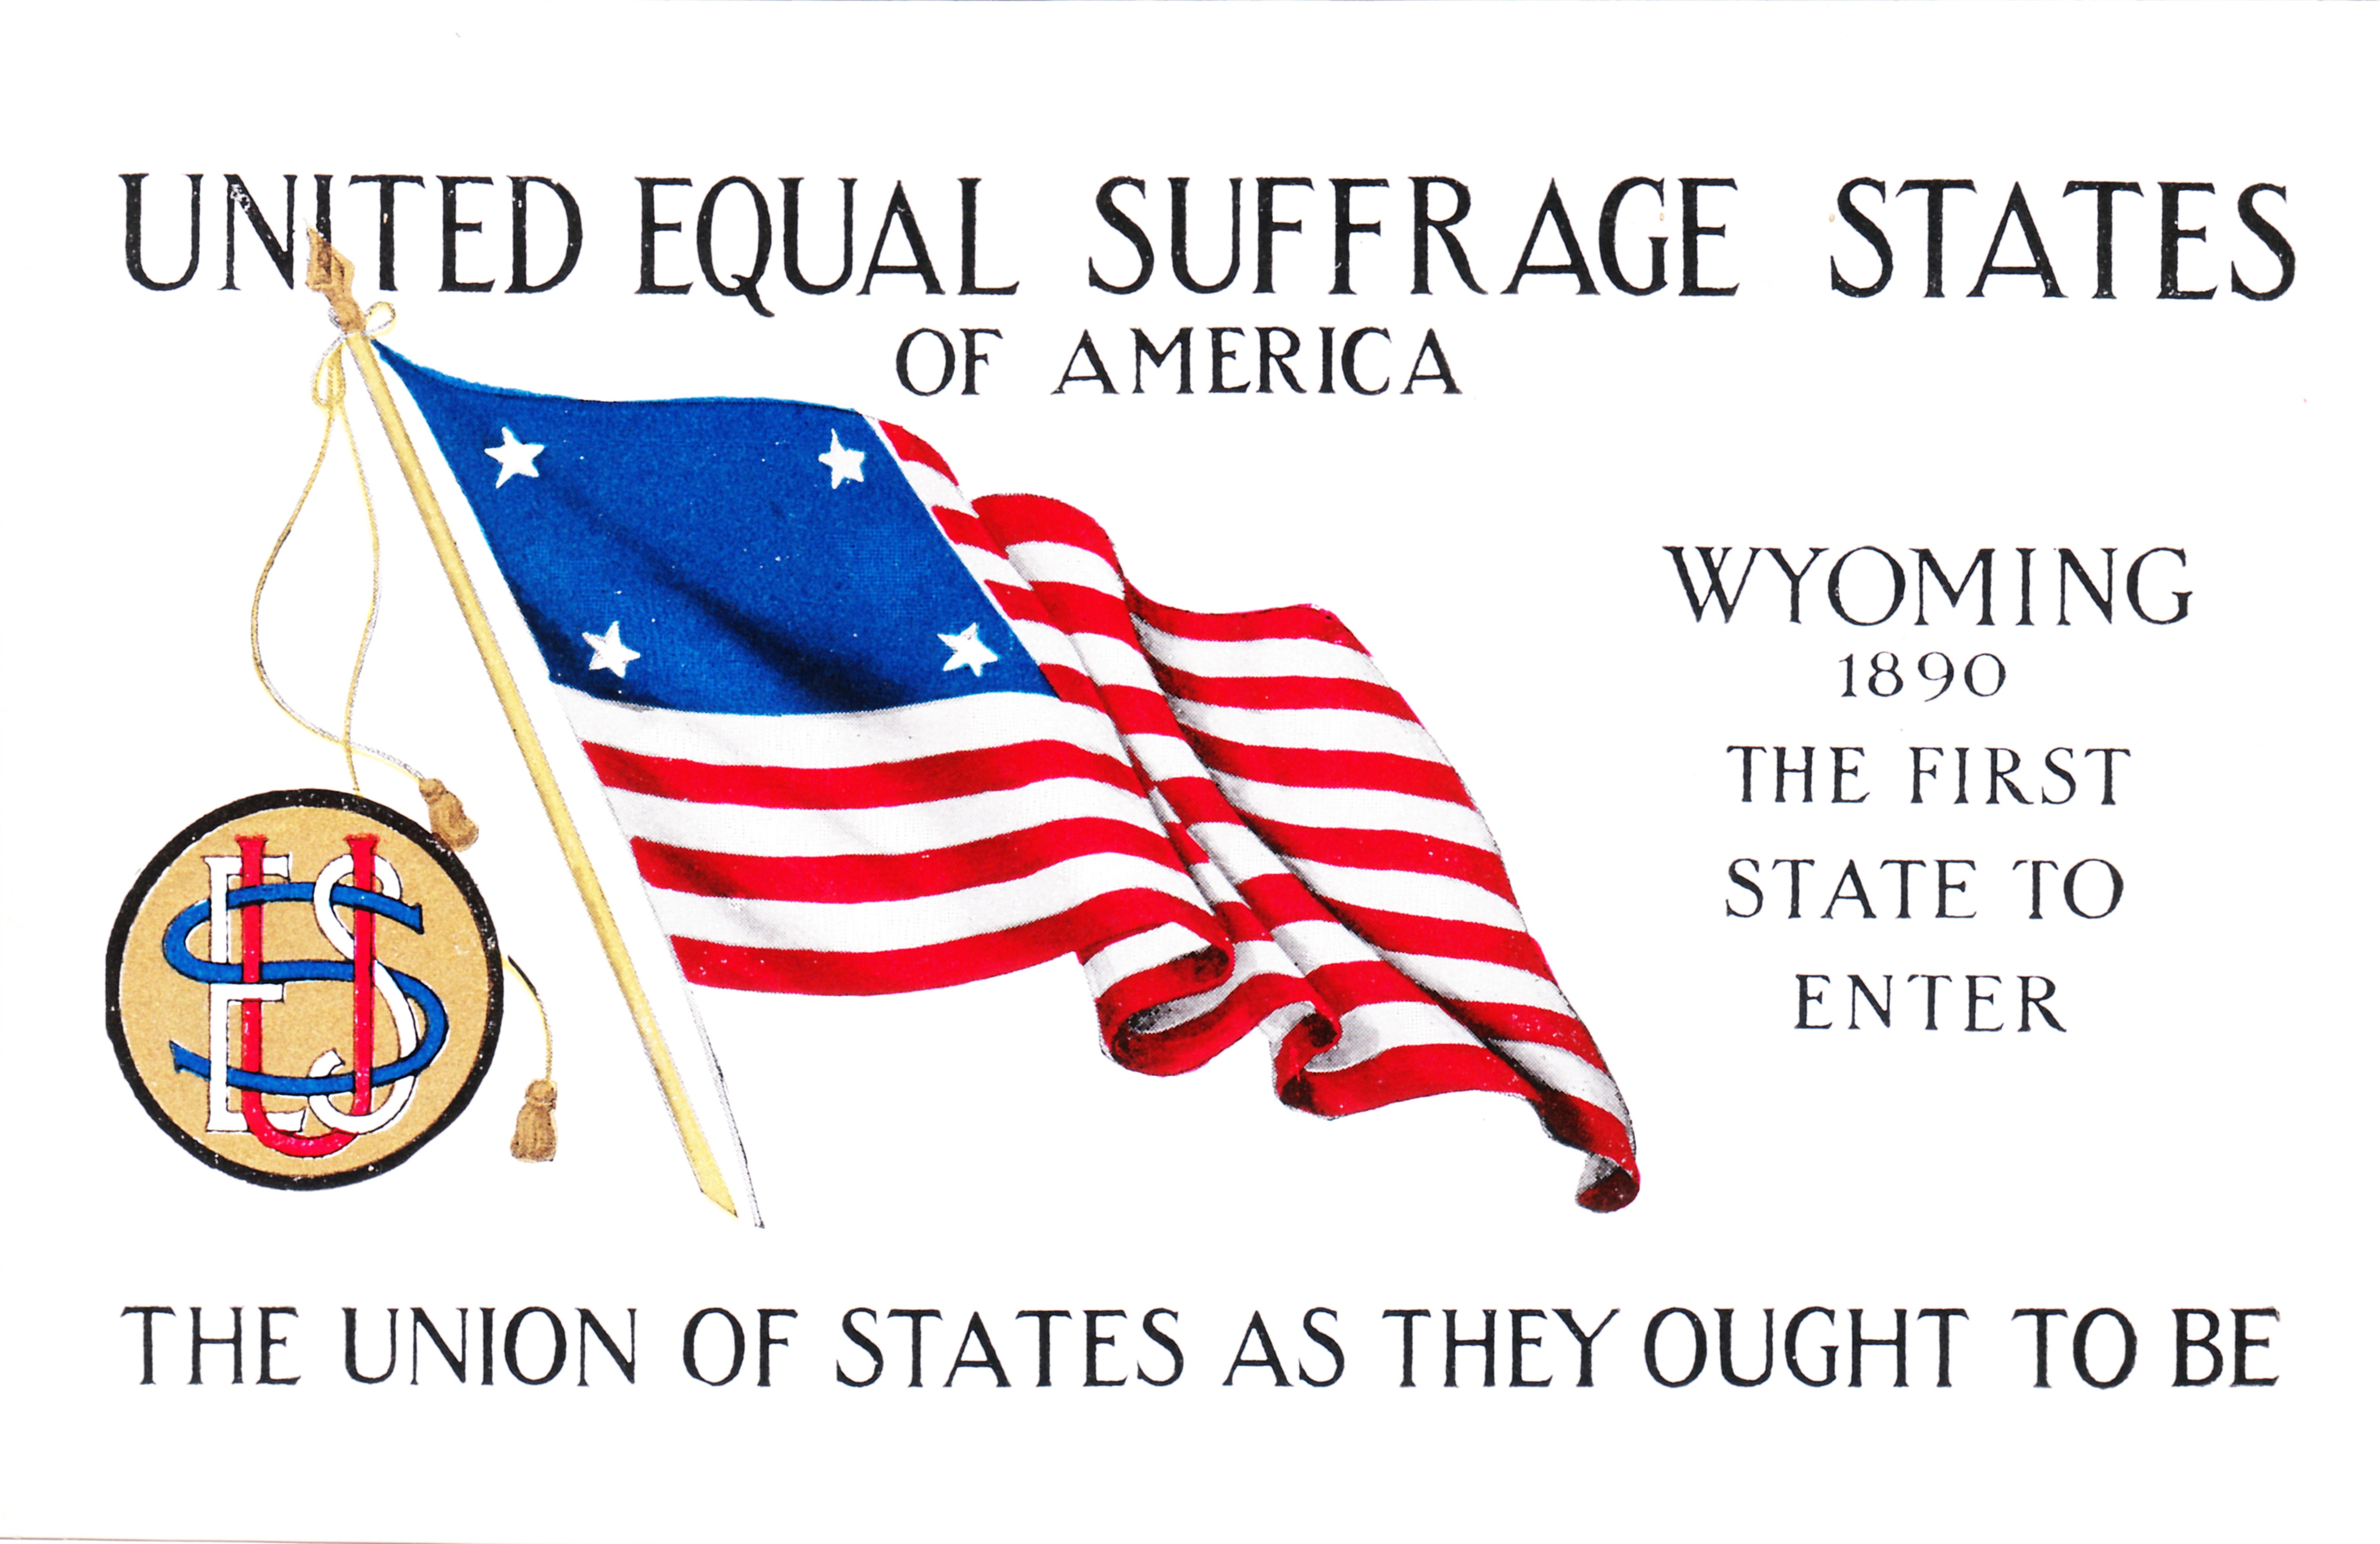 On this day in history, Wyoming Territory formed, proved global leader for women's suffrage